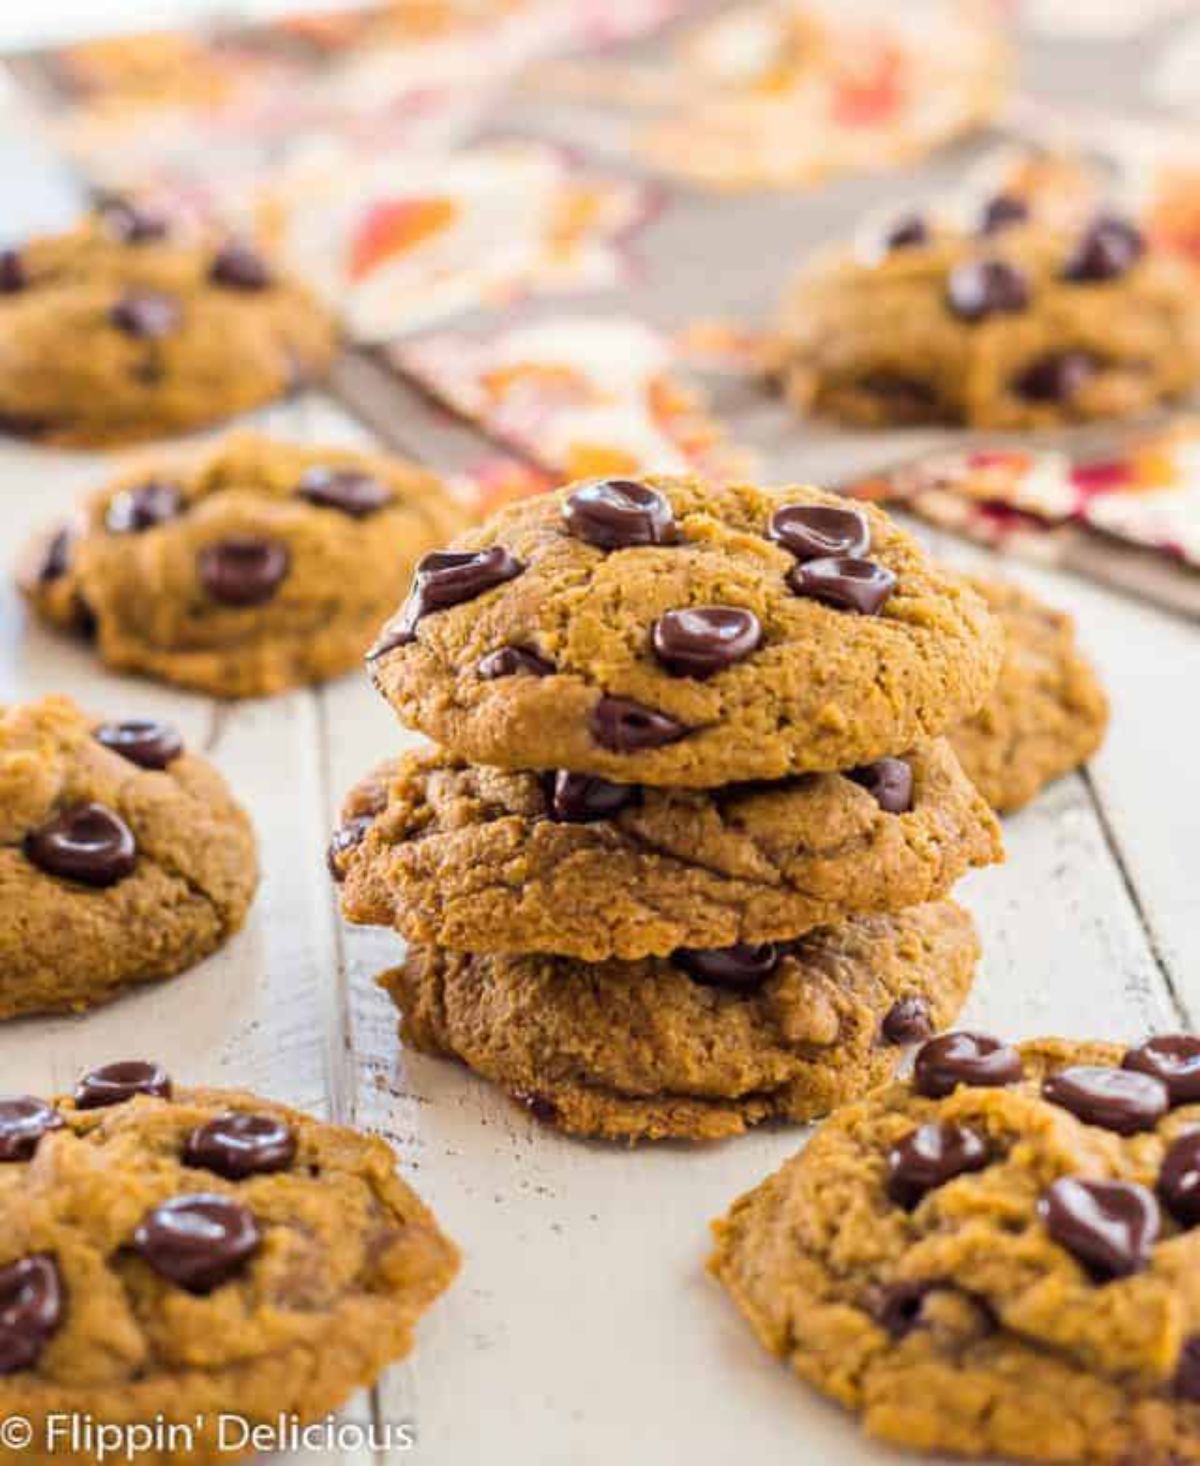 Delicious Gluten-Free Pumpkin Chocolate Chip Cookies on a wooden table.